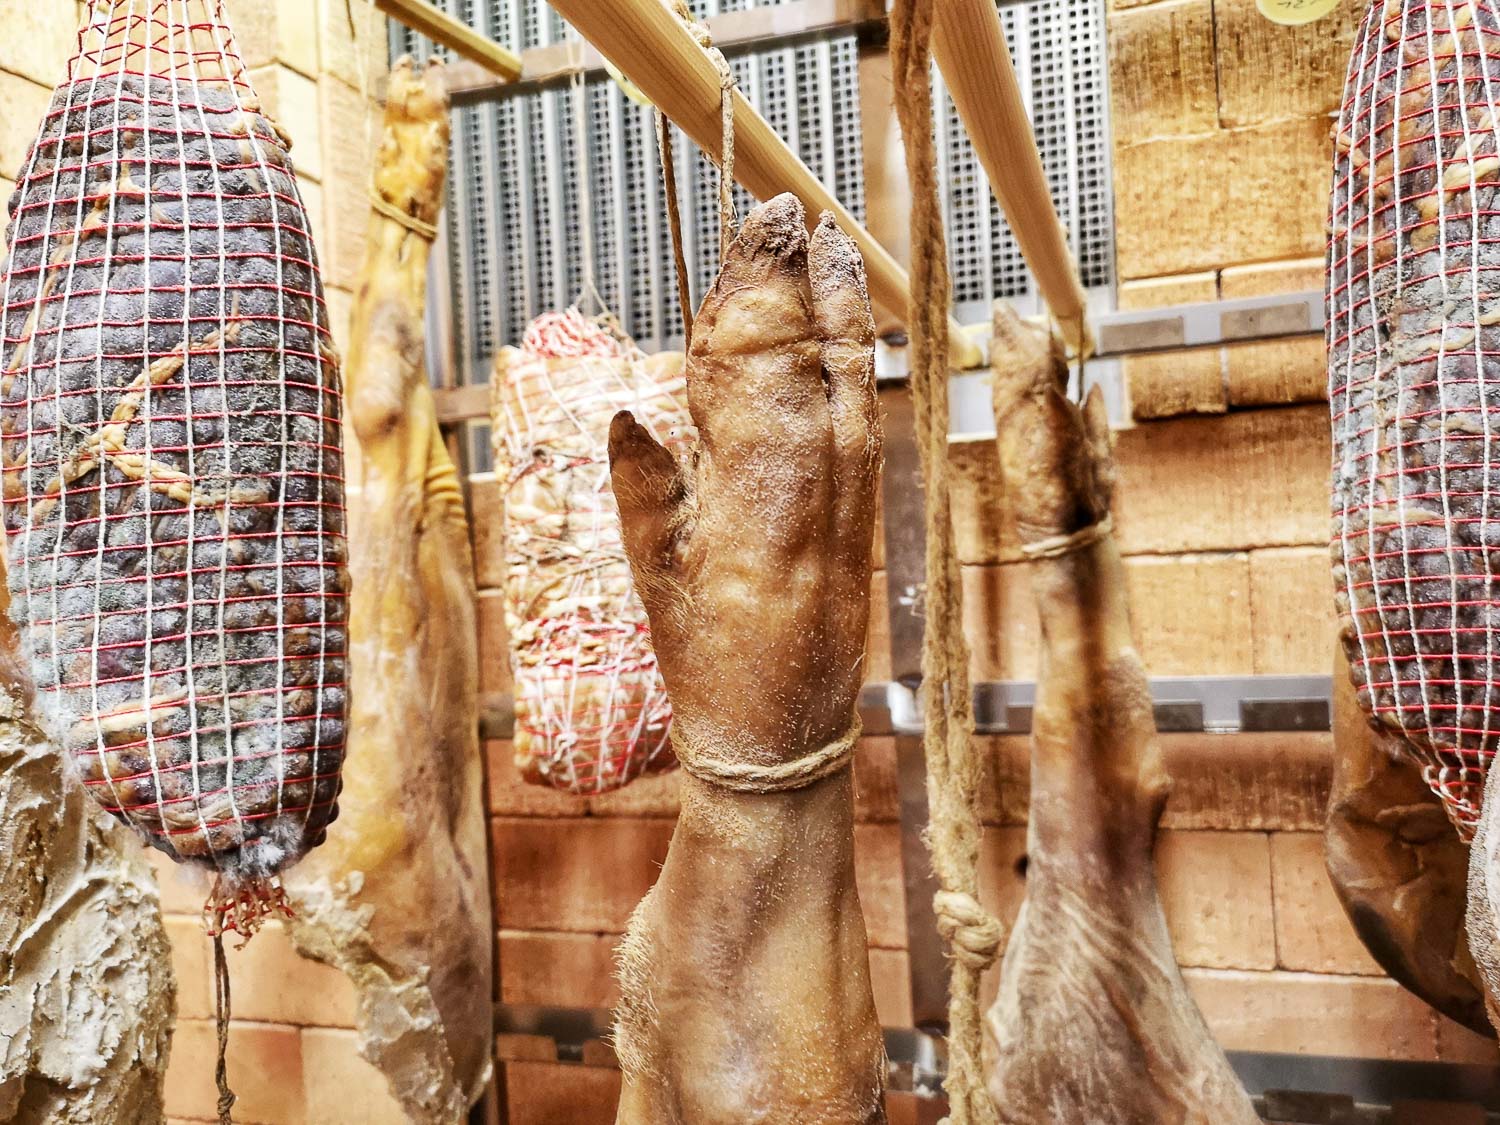 Dried meats in a cellar in Slovenia